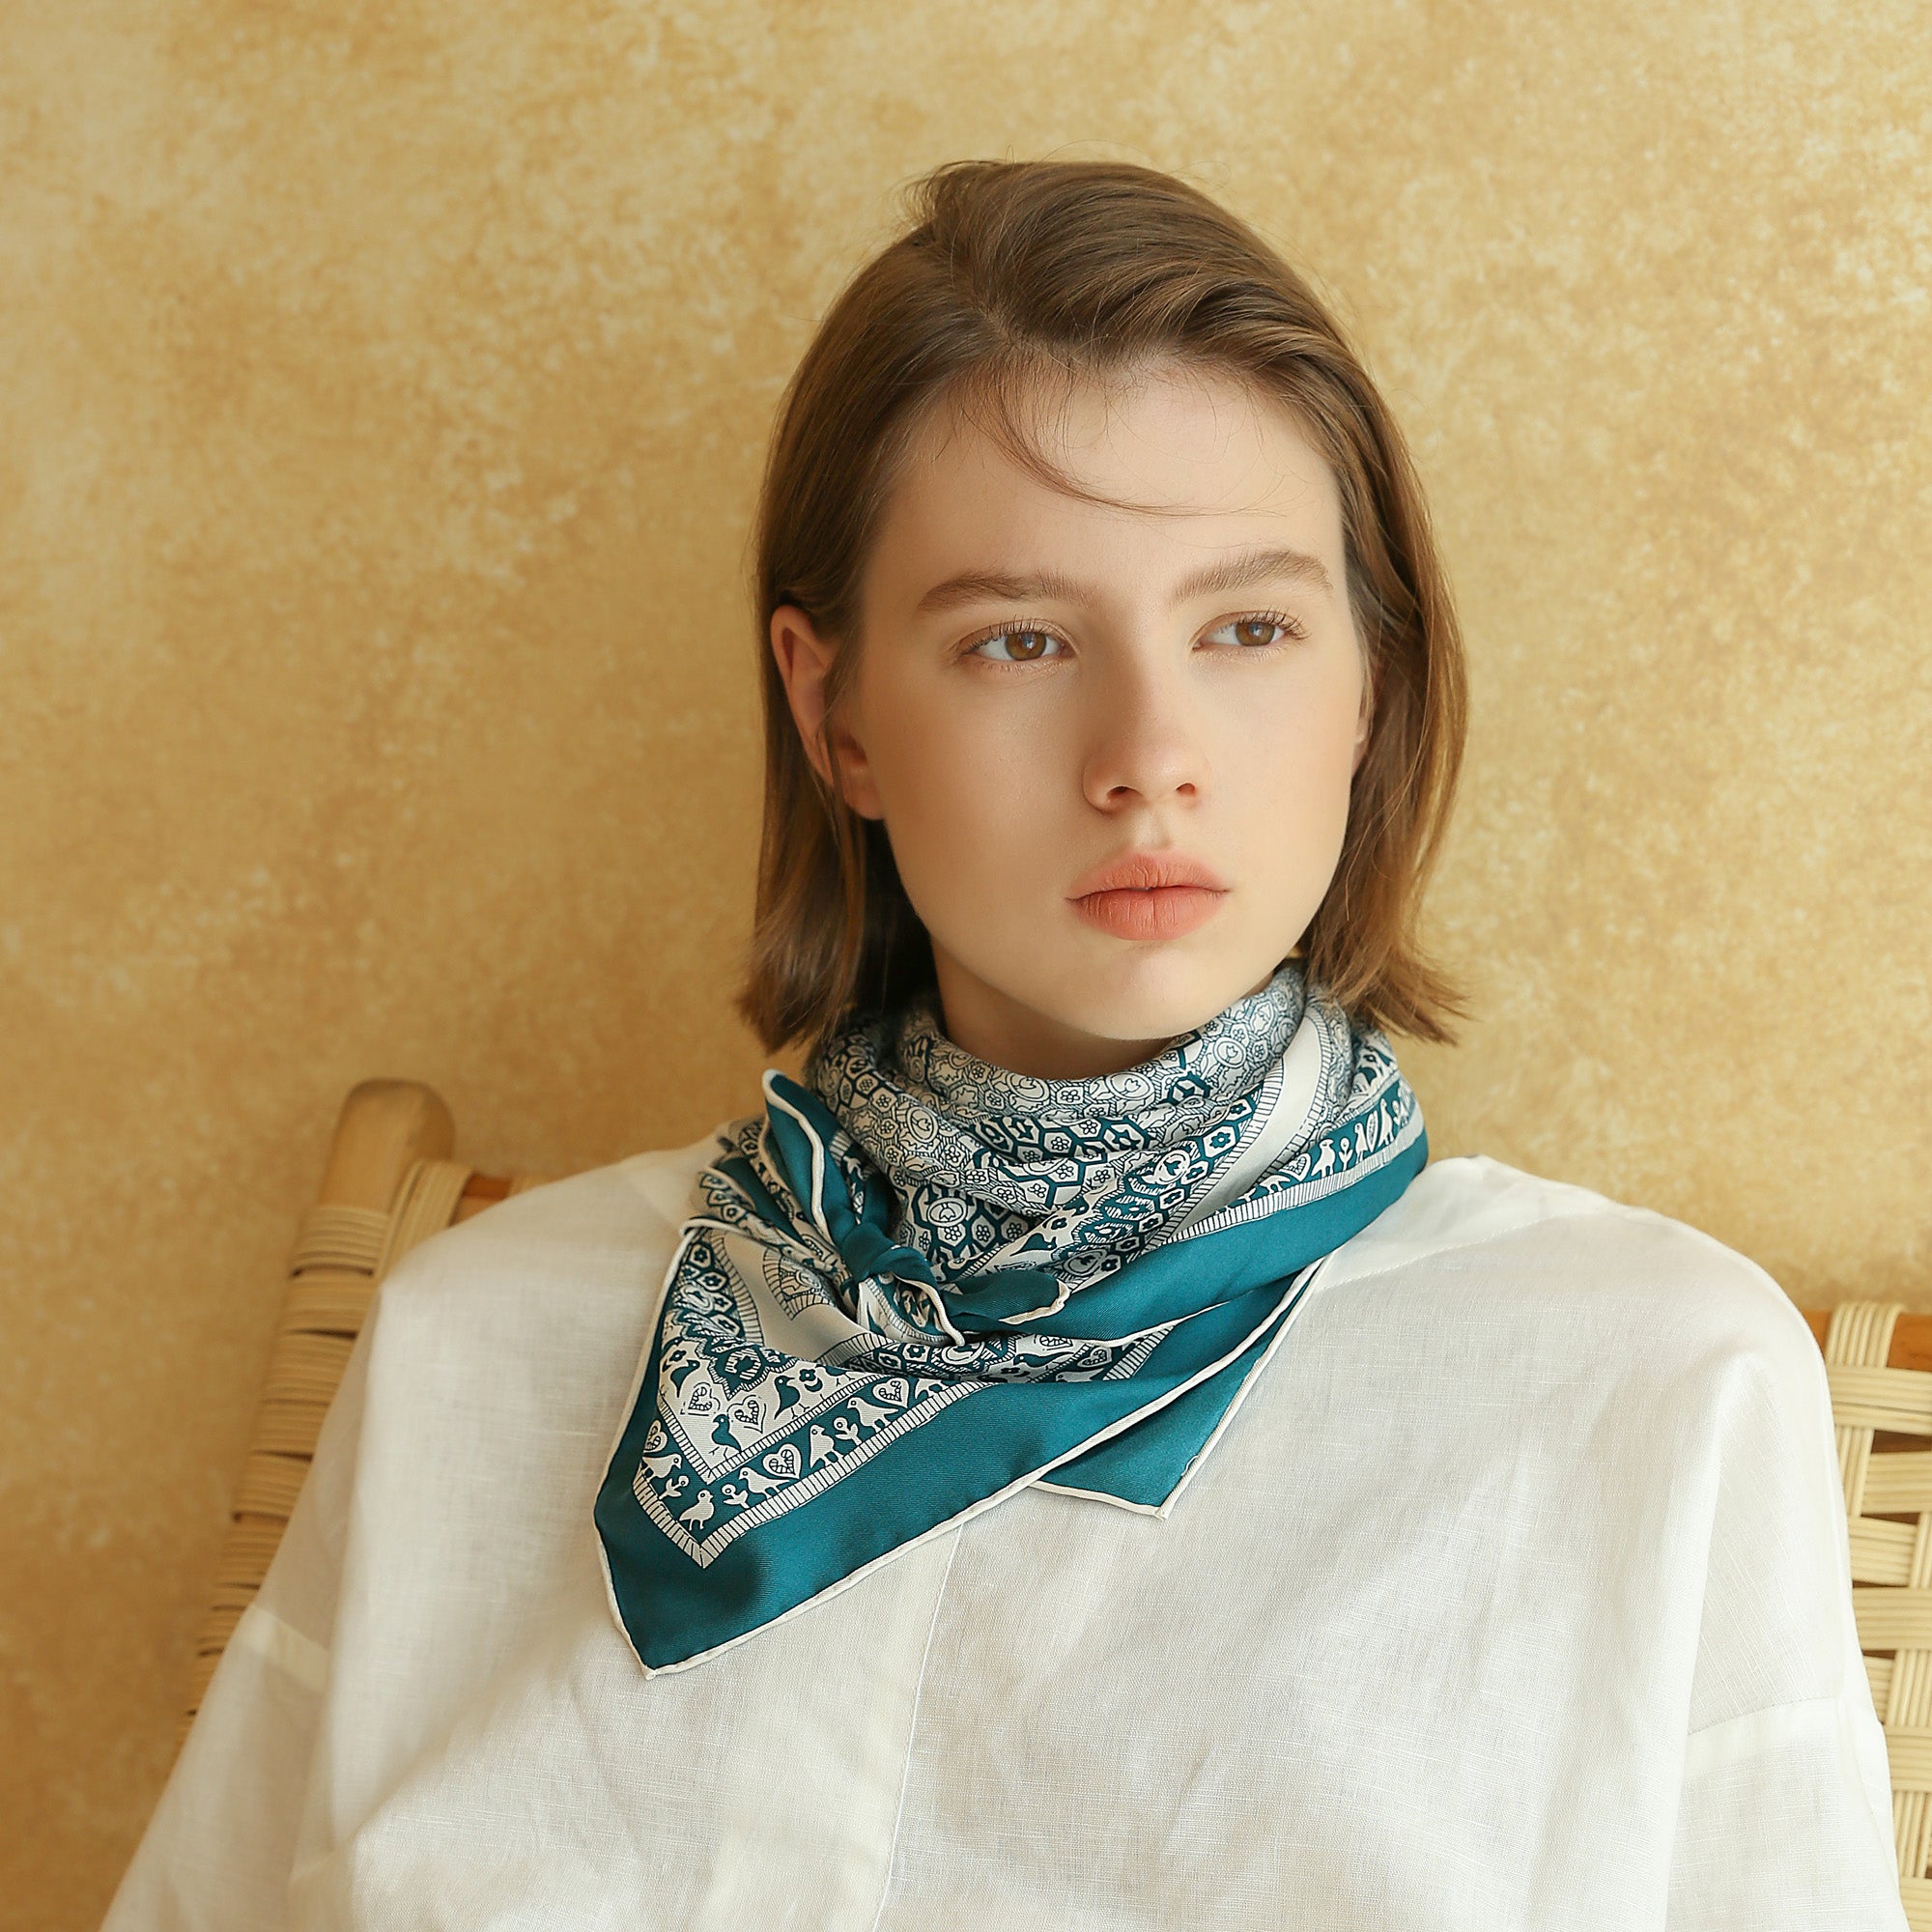 a turquoise blue square silk scarf with birds, flowers and trees prints worn by a young lady as a neck scarf